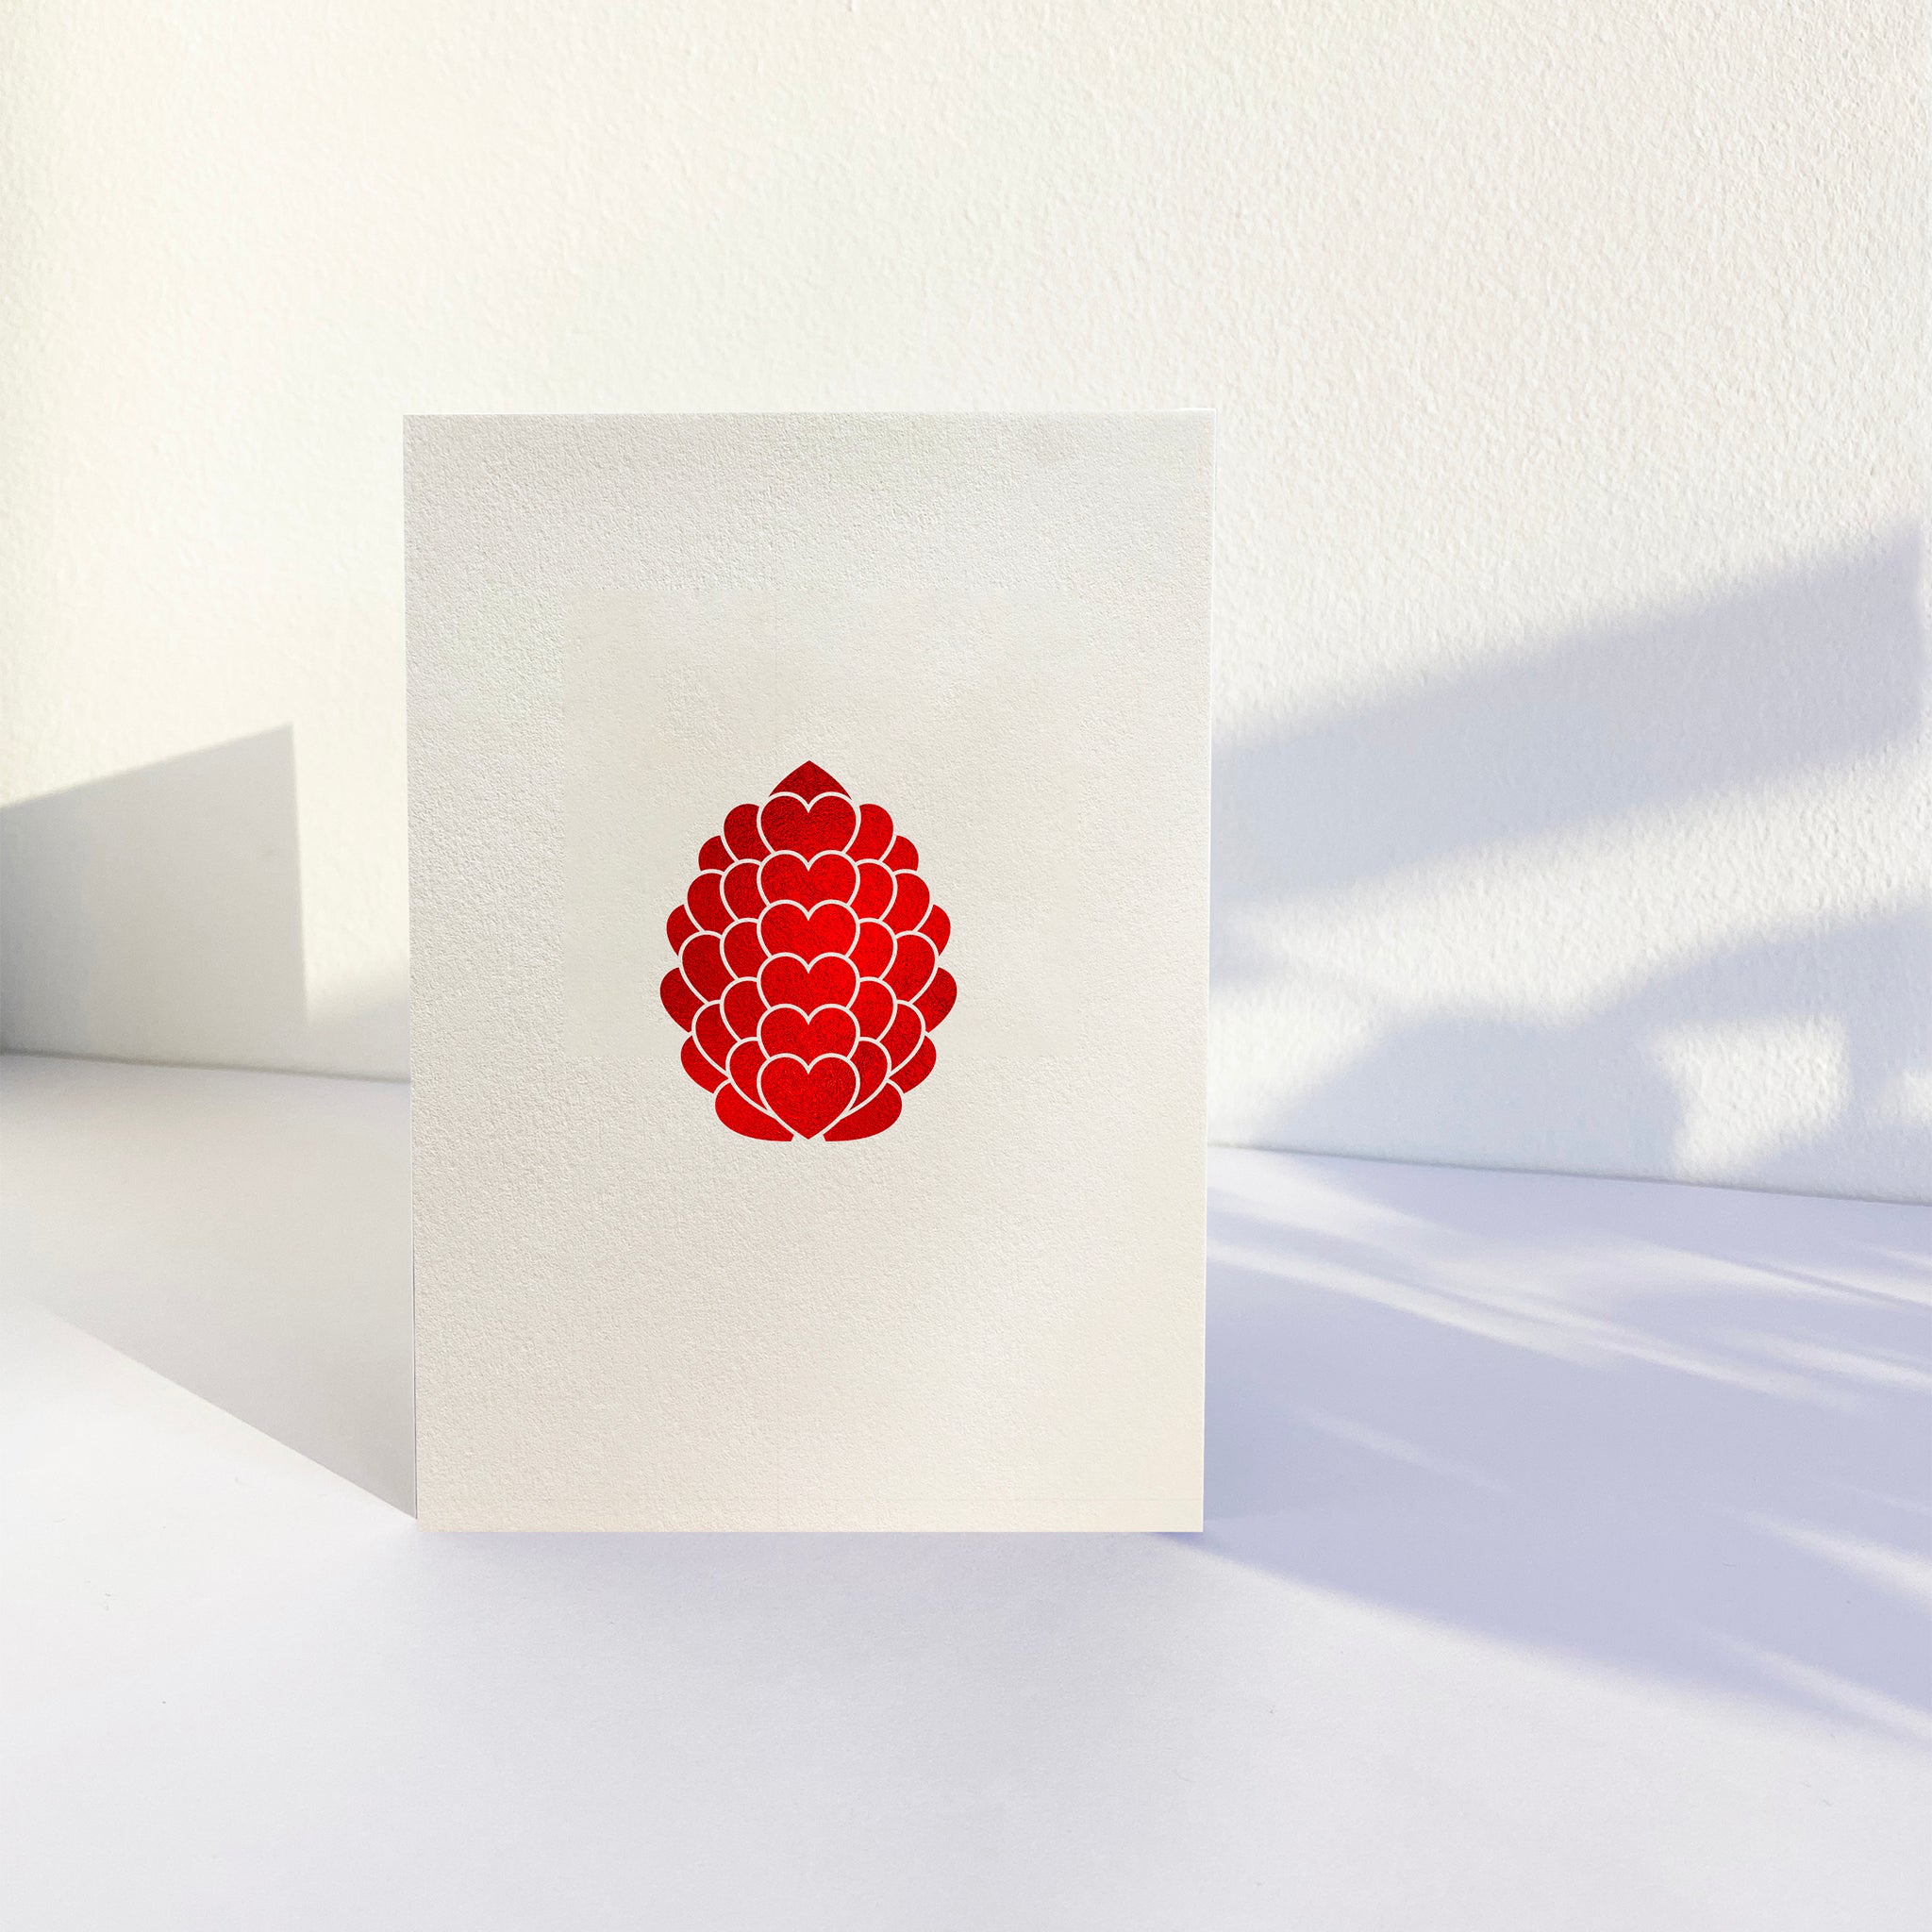 Hot foil pressed pinecone love heart graphic in red on white card. Card is vertical and standing with white background.